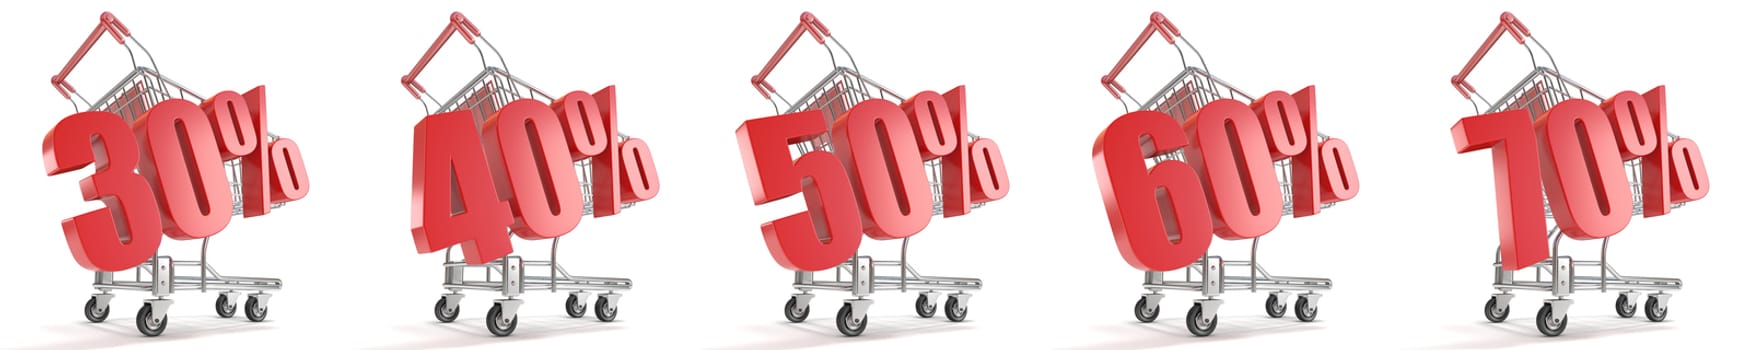 30%, 40%, 50%, 60%, 70% percent discount in front of shopping cart. Sale concept. 3D render illustration isolated on white background